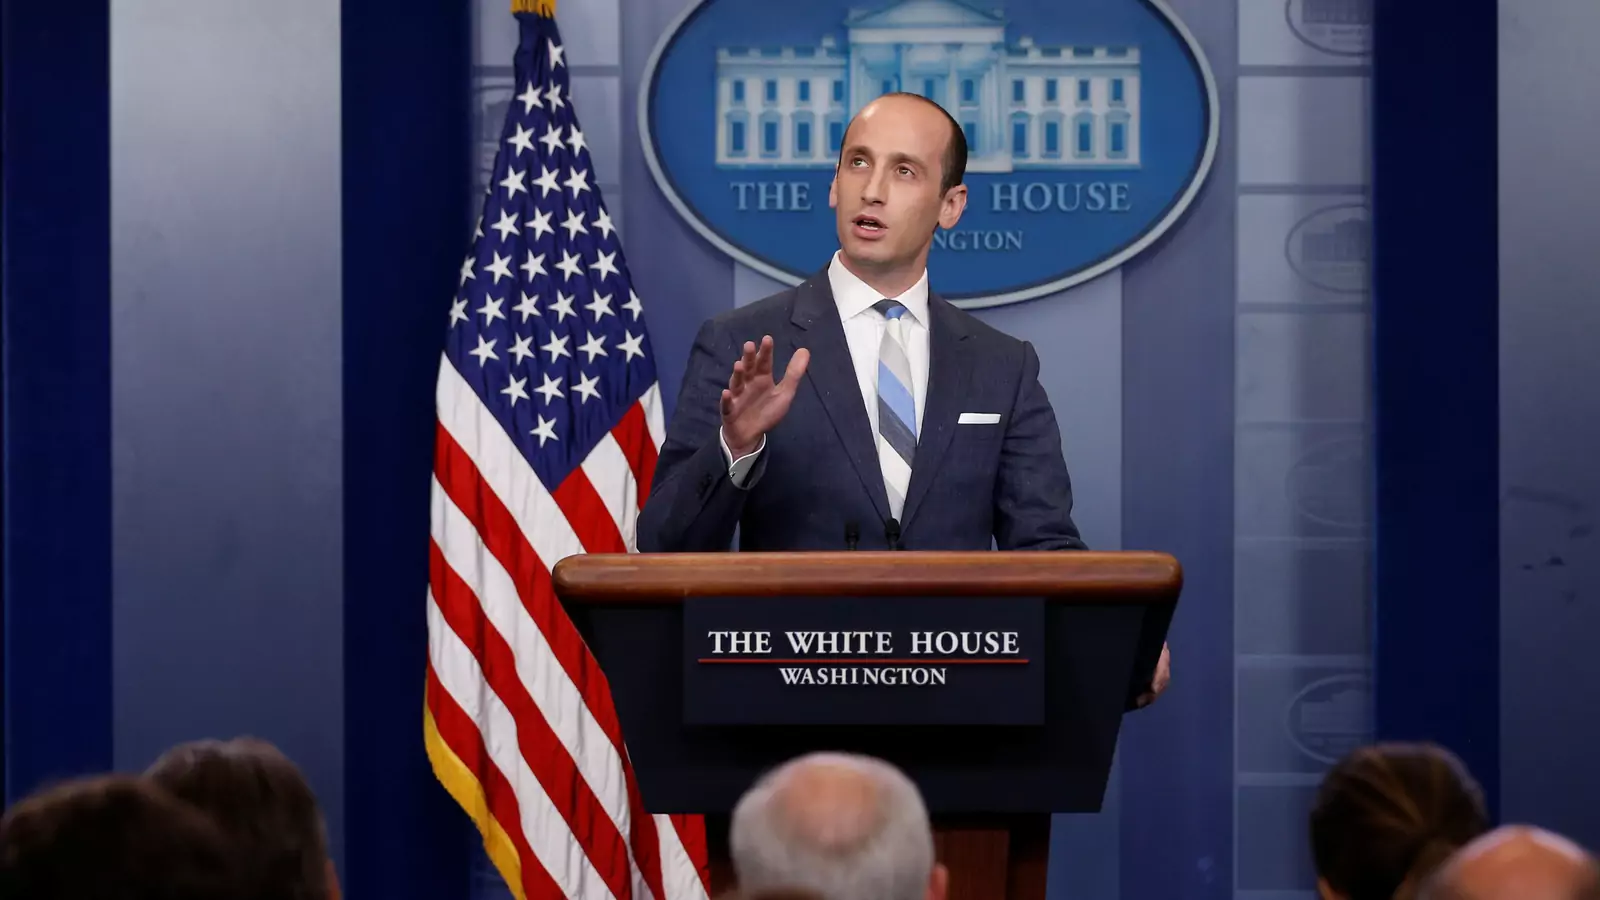 White House senior policy advisor Stephen Miller discusses U.S. immigration policy at the daily press briefing at the White House.